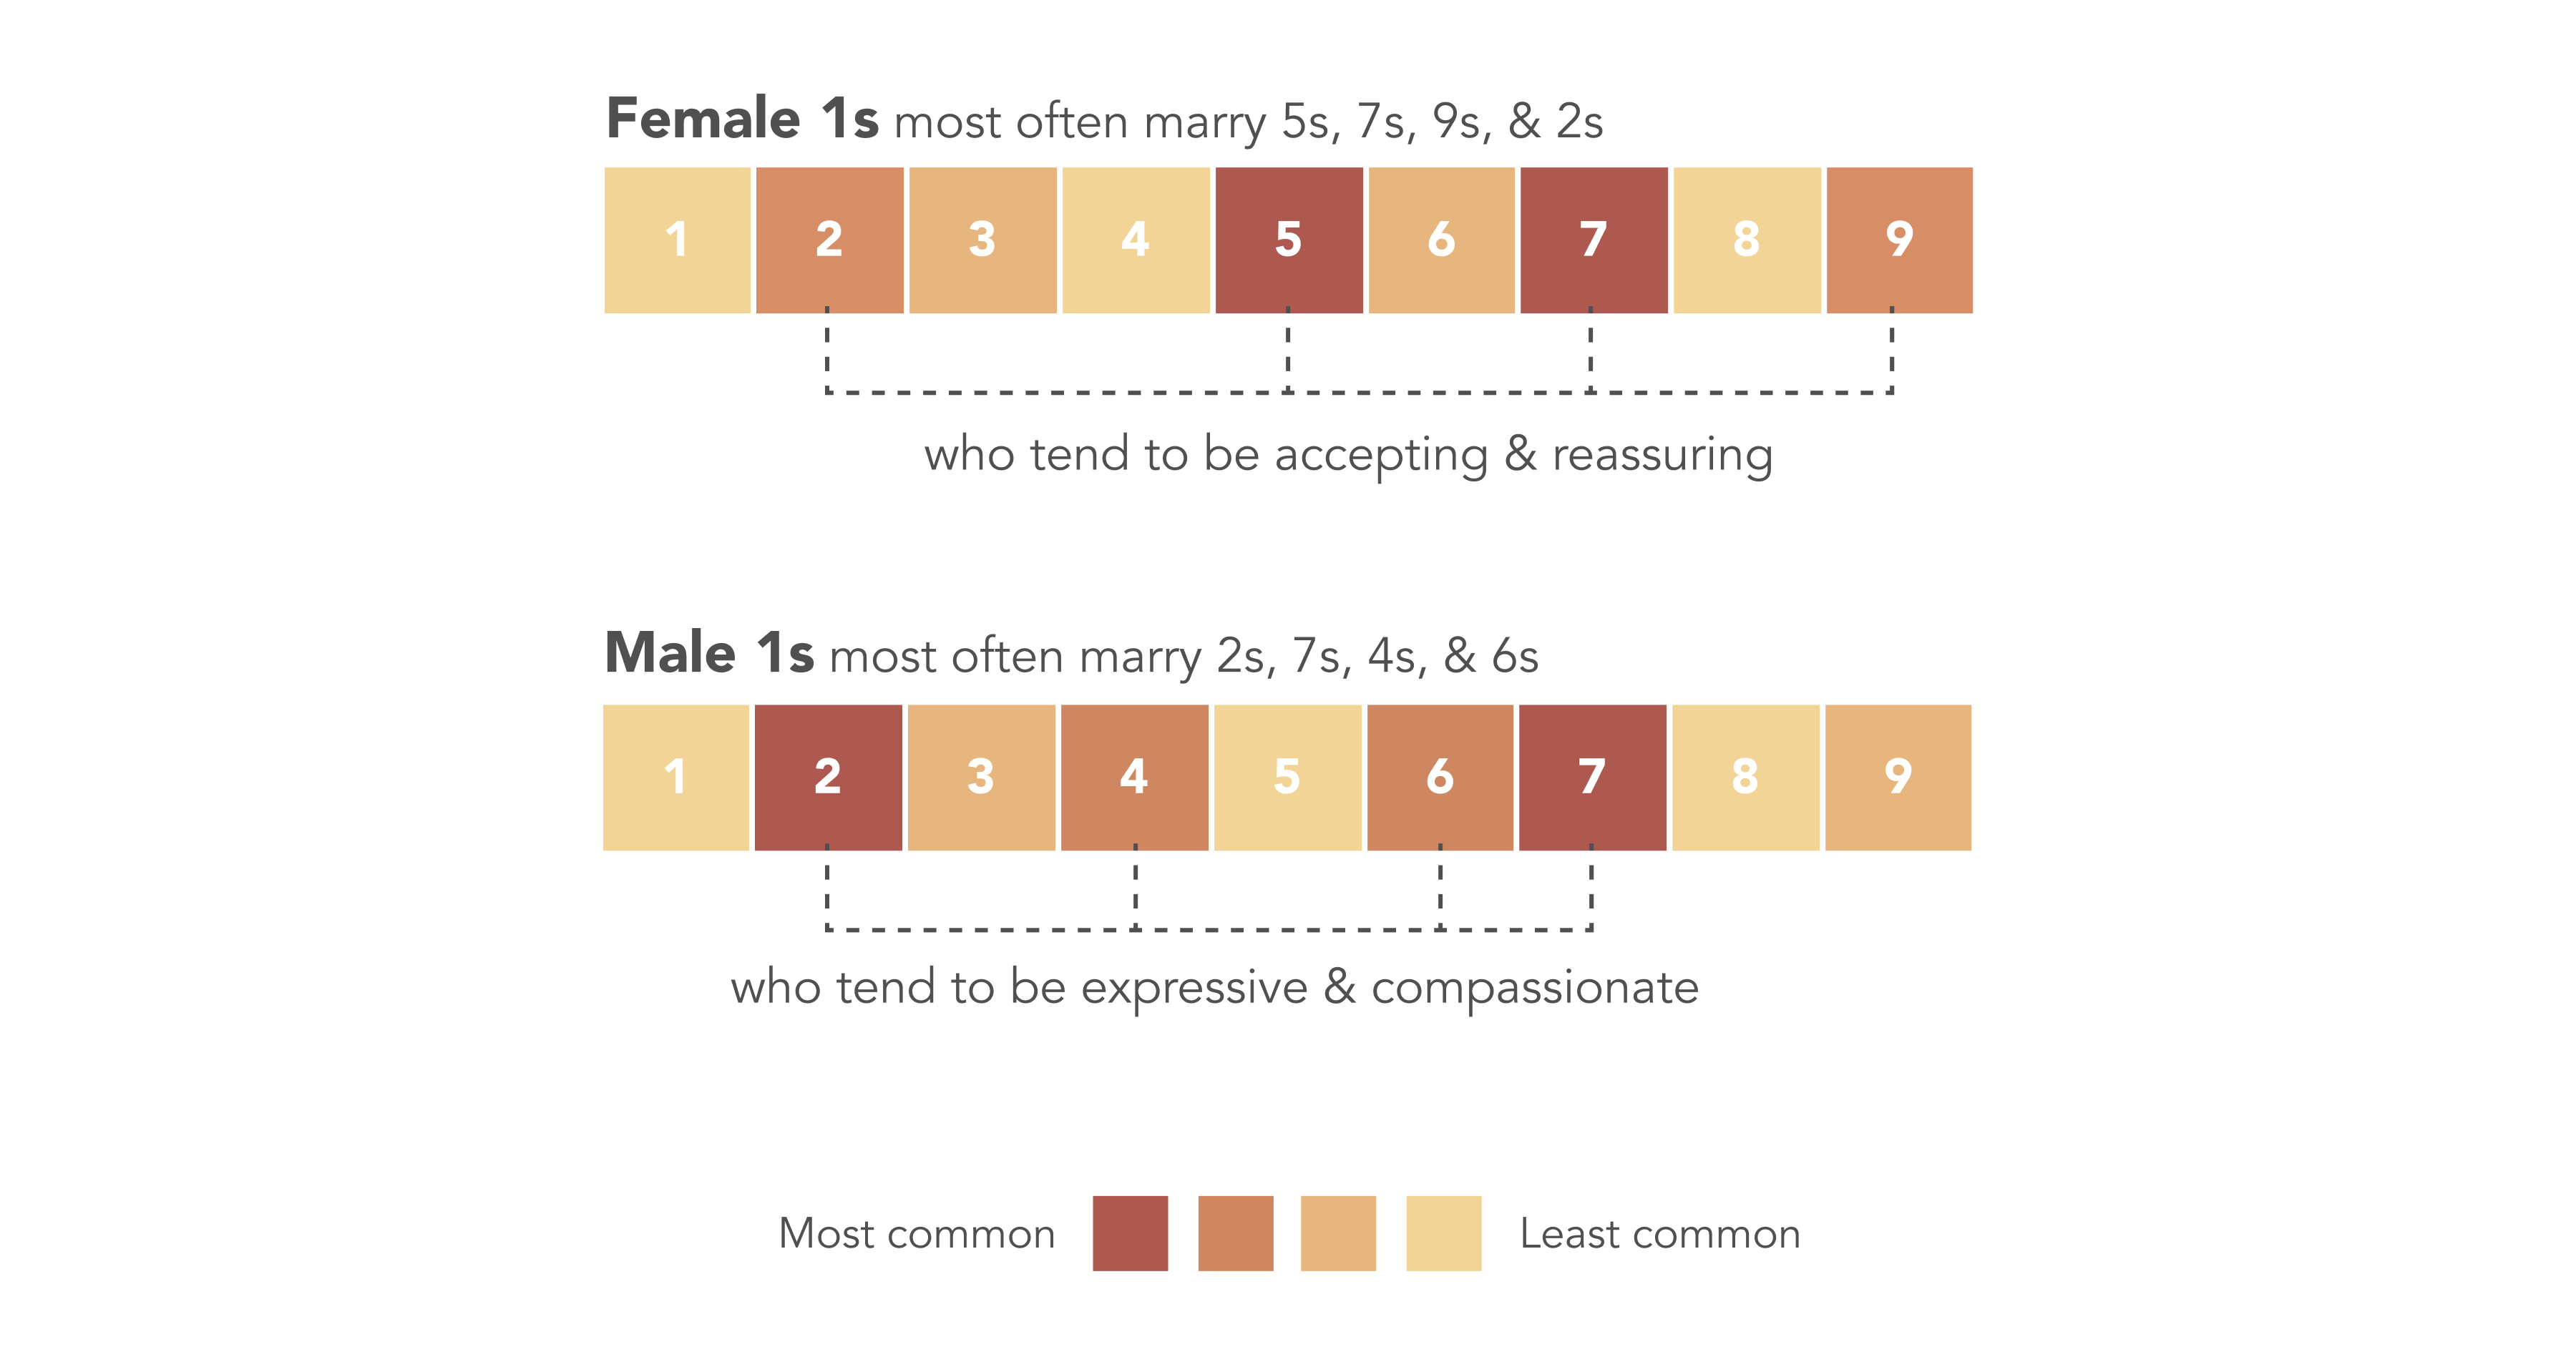 Female 1s most often marrying 5s, 7s, 9s, and 2, and Male 1s most often marrying 2s, 7s, 4s, and 6s (in that order)